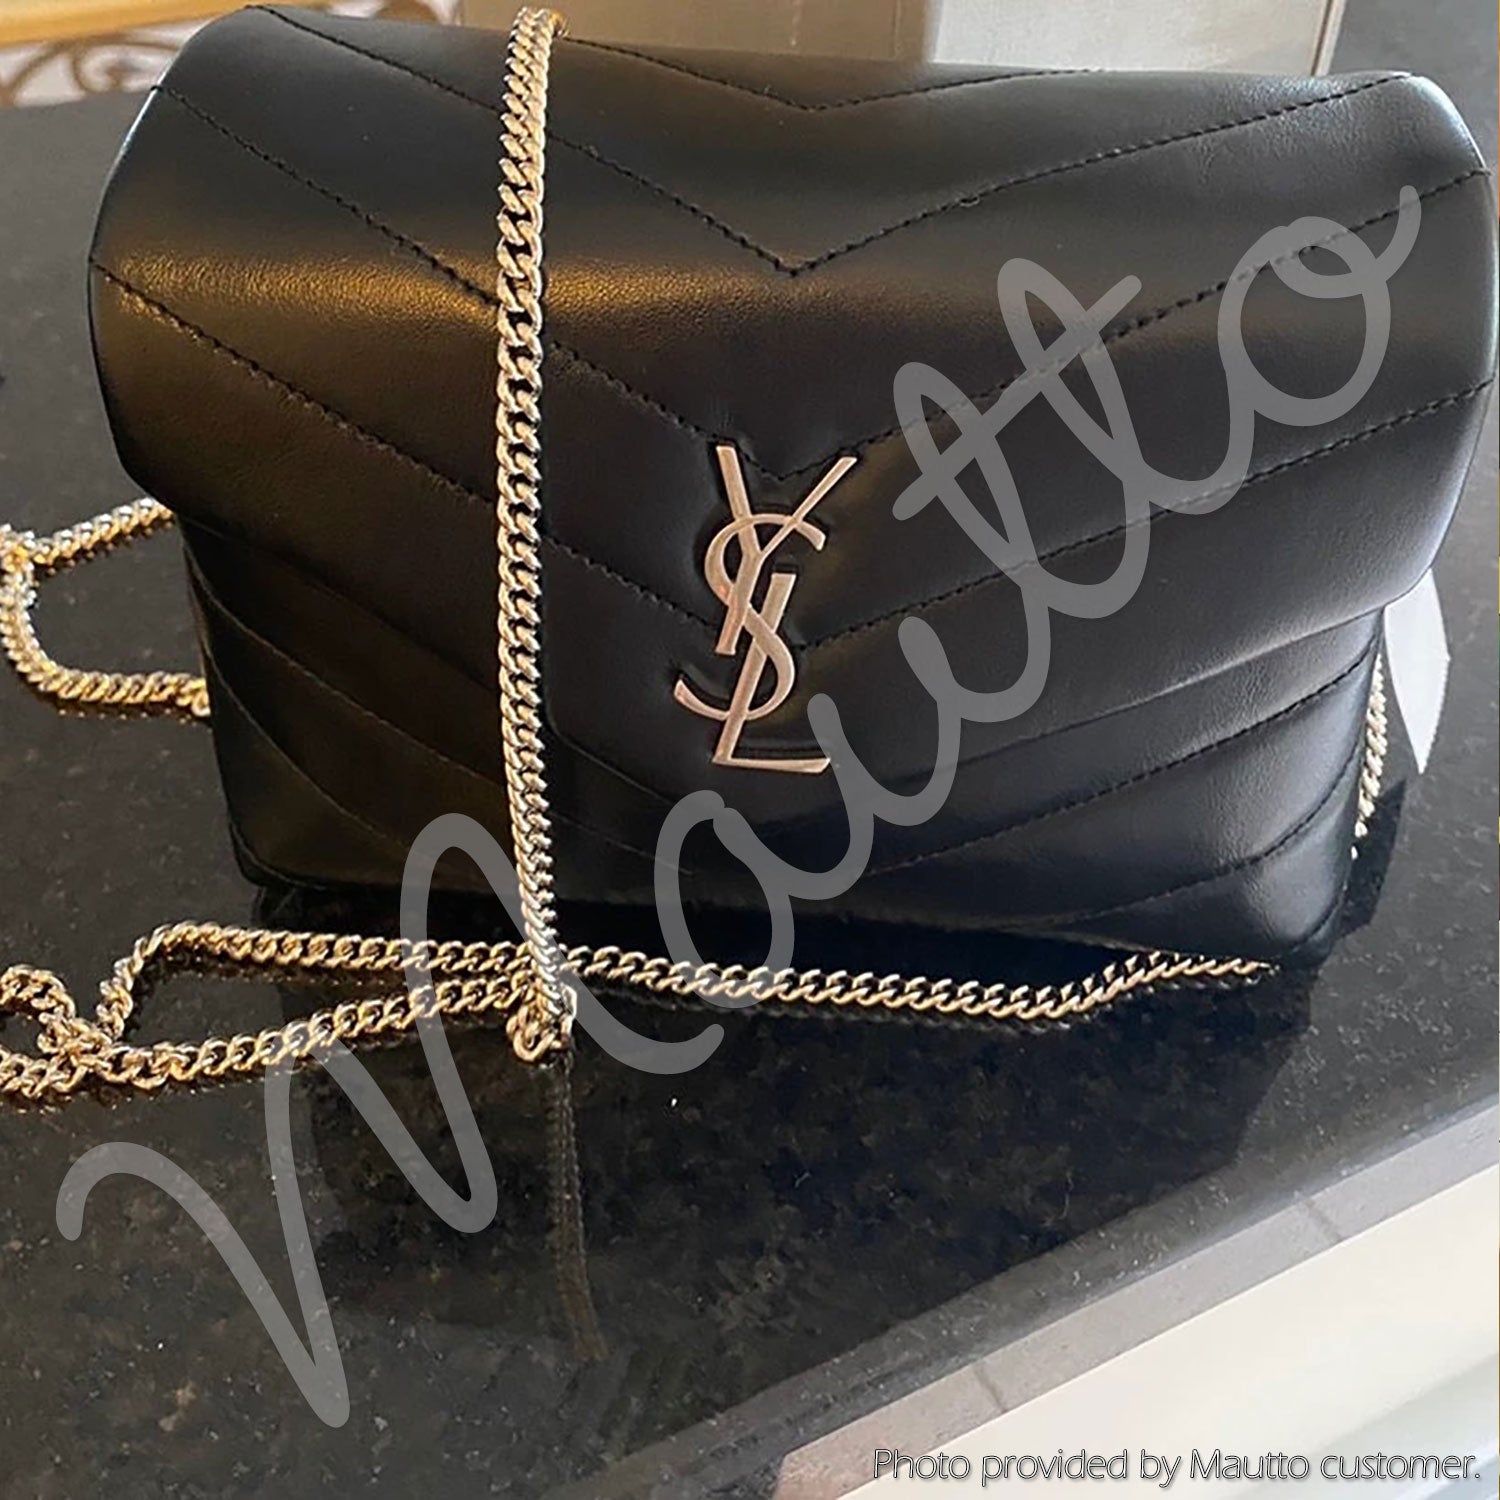 ysl toy loulou chain strap